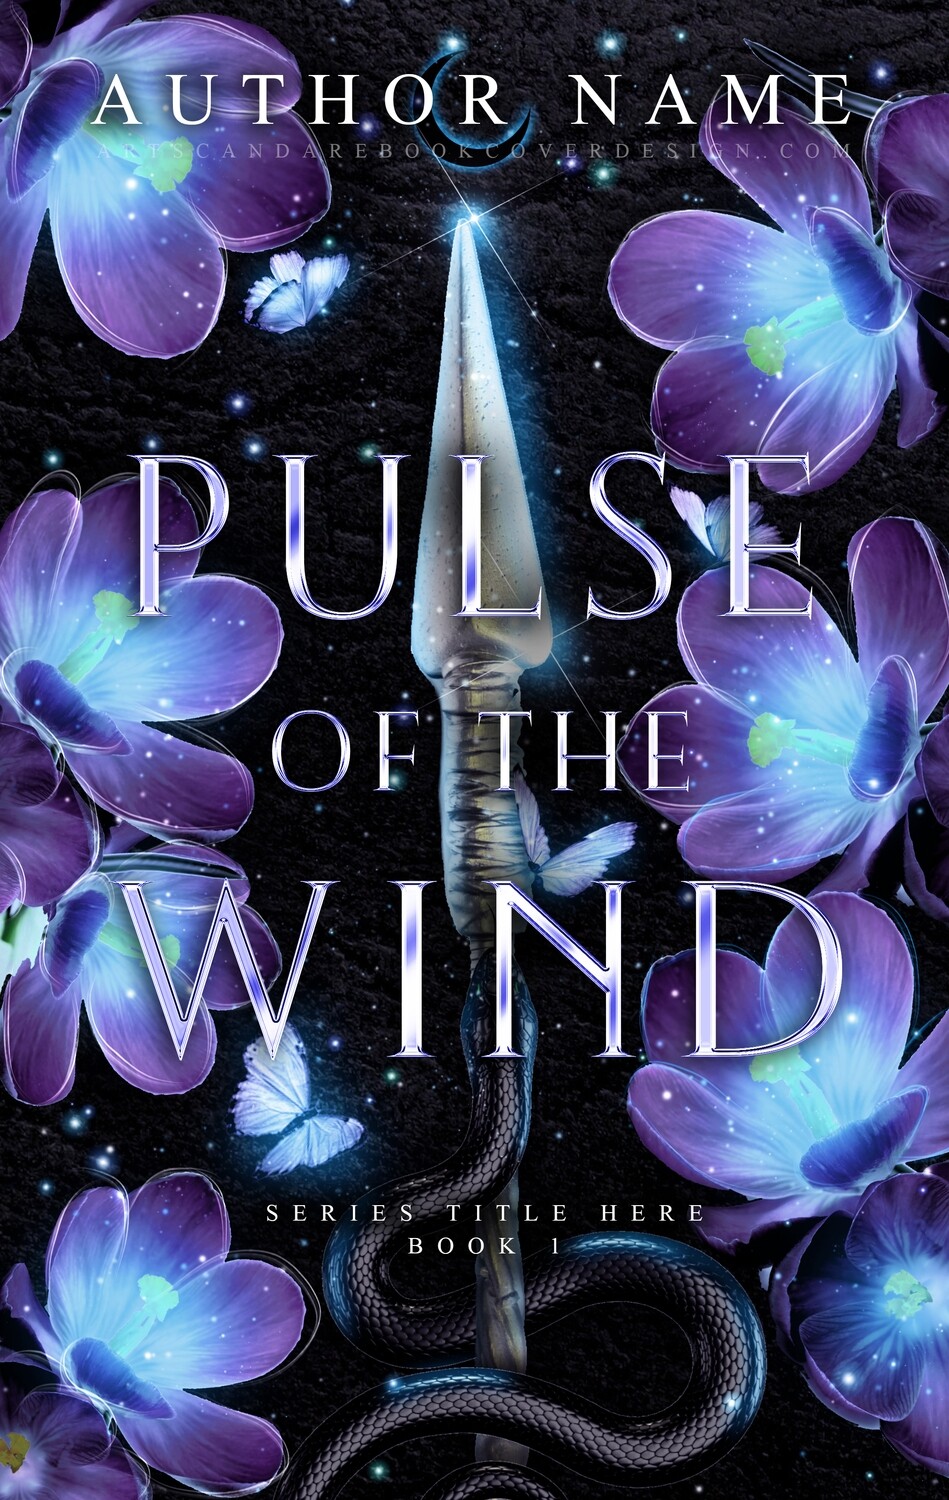 PULSE OF THE WIND